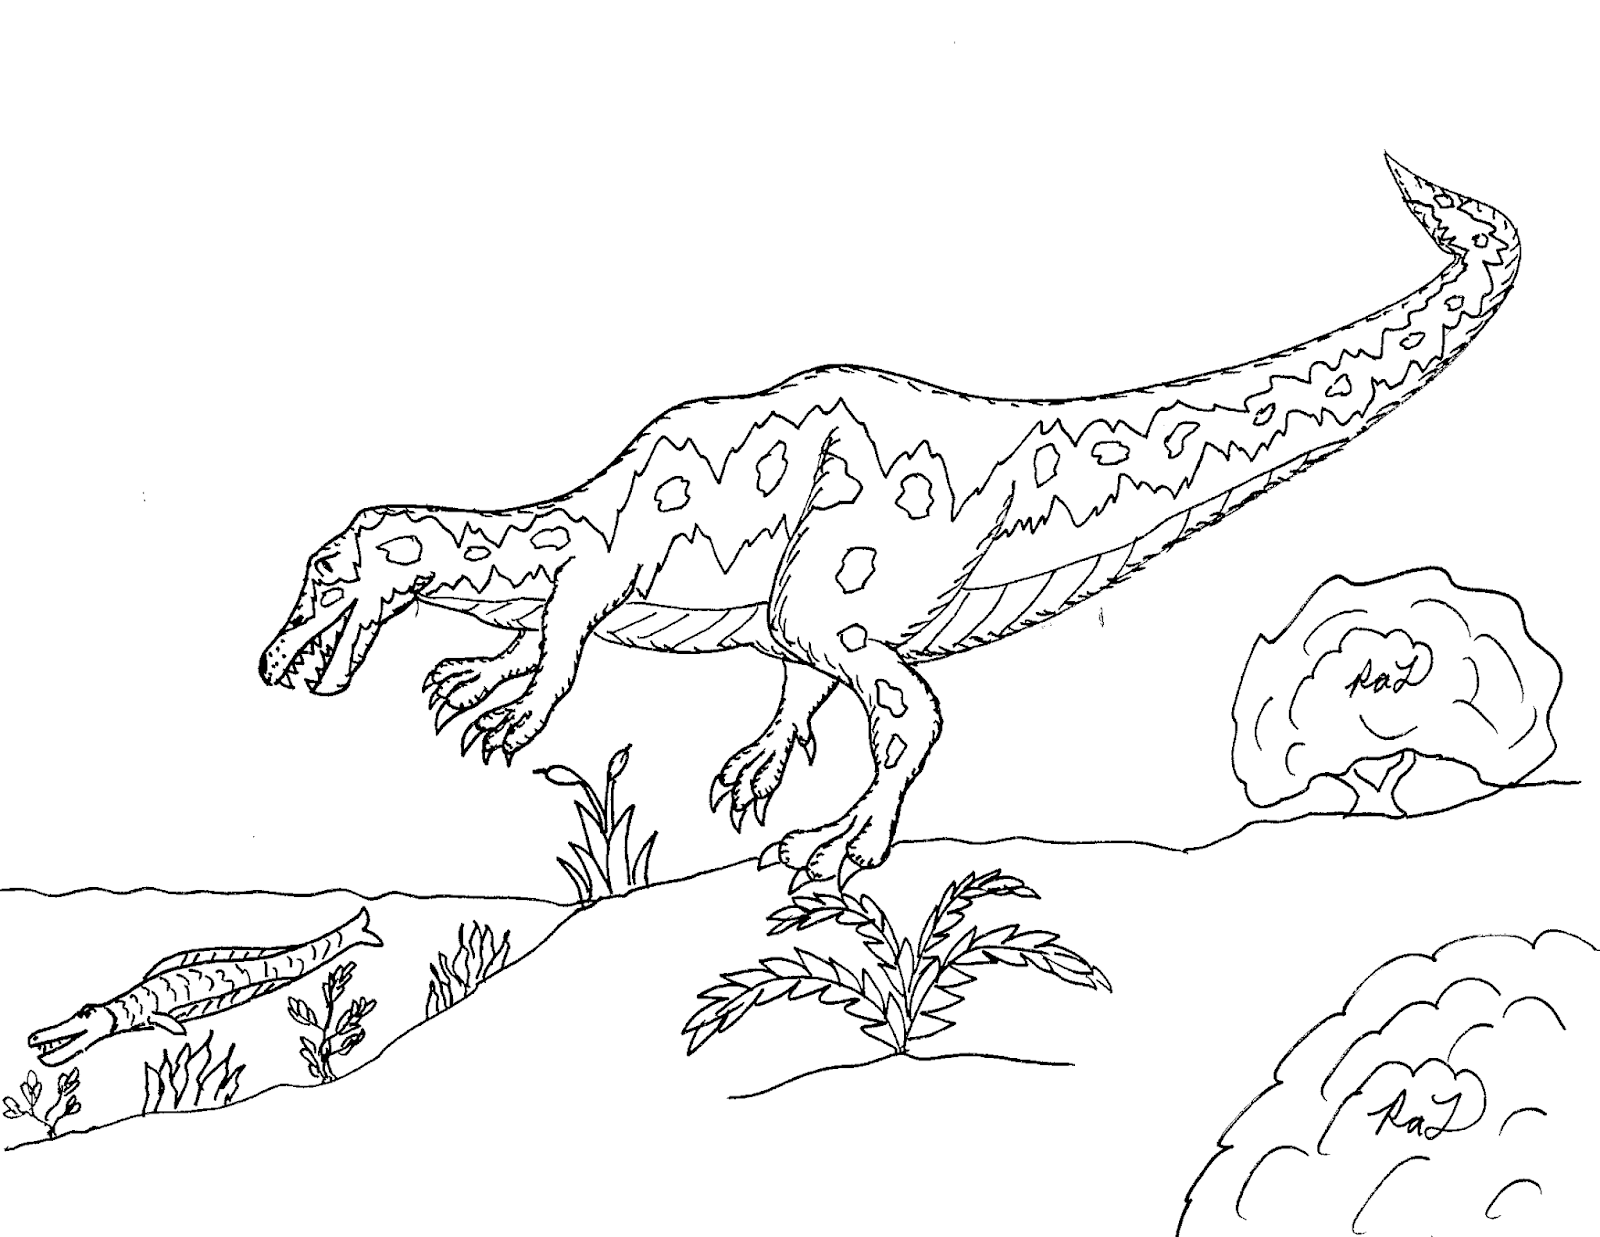 Robin's Great Coloring Pages: Baryonyx Fishing